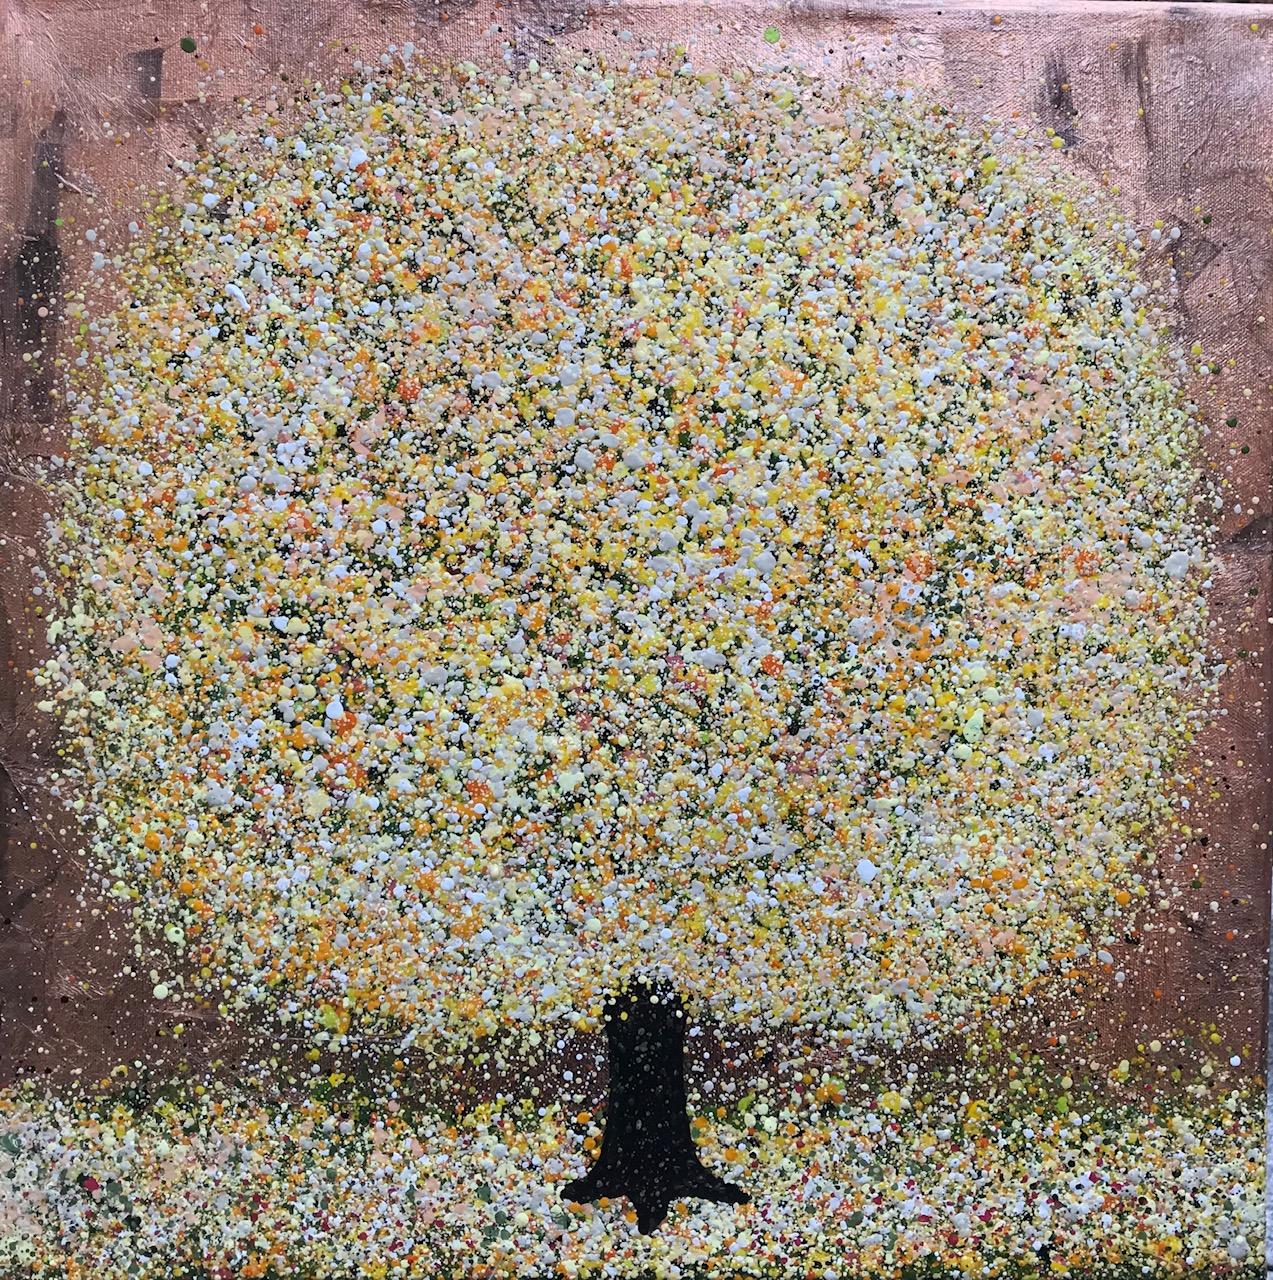 Honey, Nicky Chubb, Tree art, Nature, Yellow, Affordable art, Mixed media on can